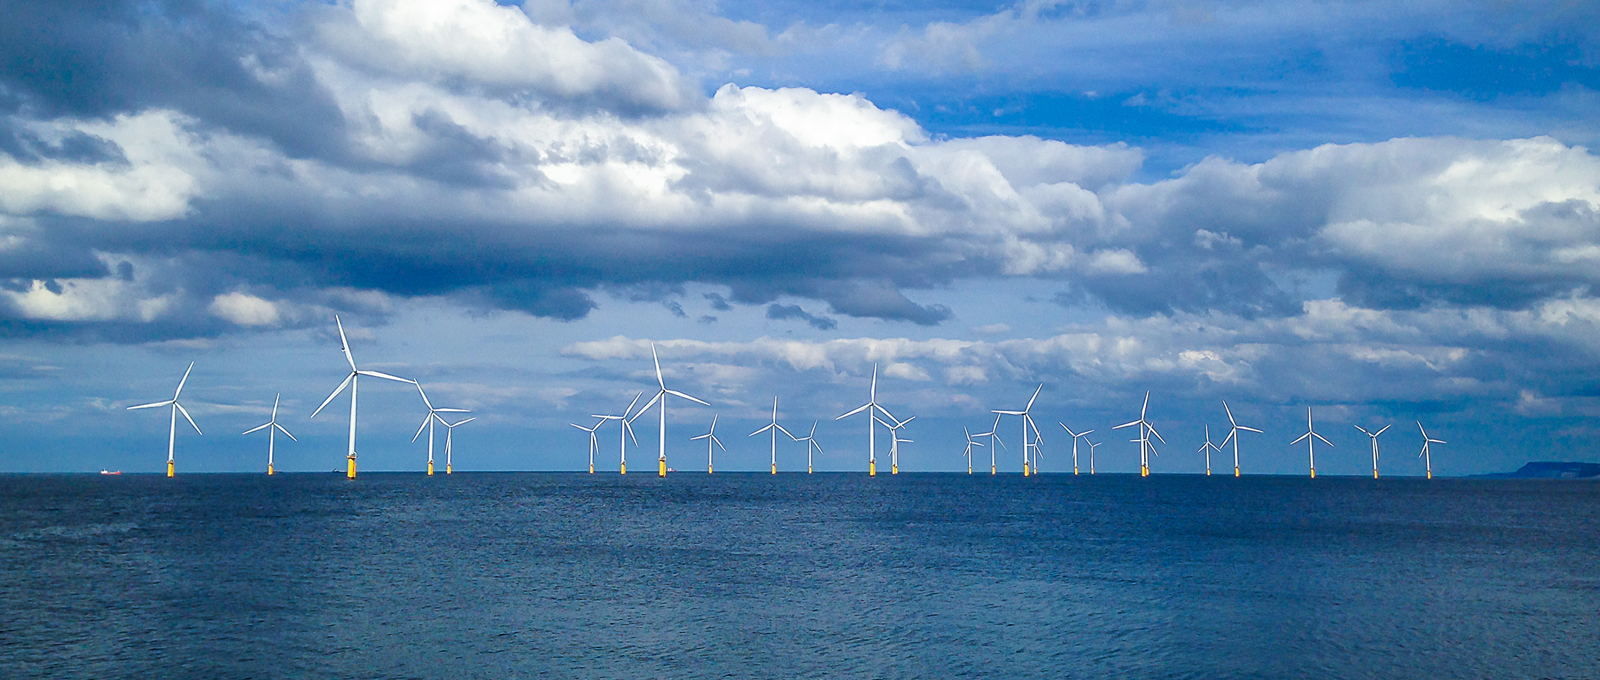 A photo of an offshore wind farm